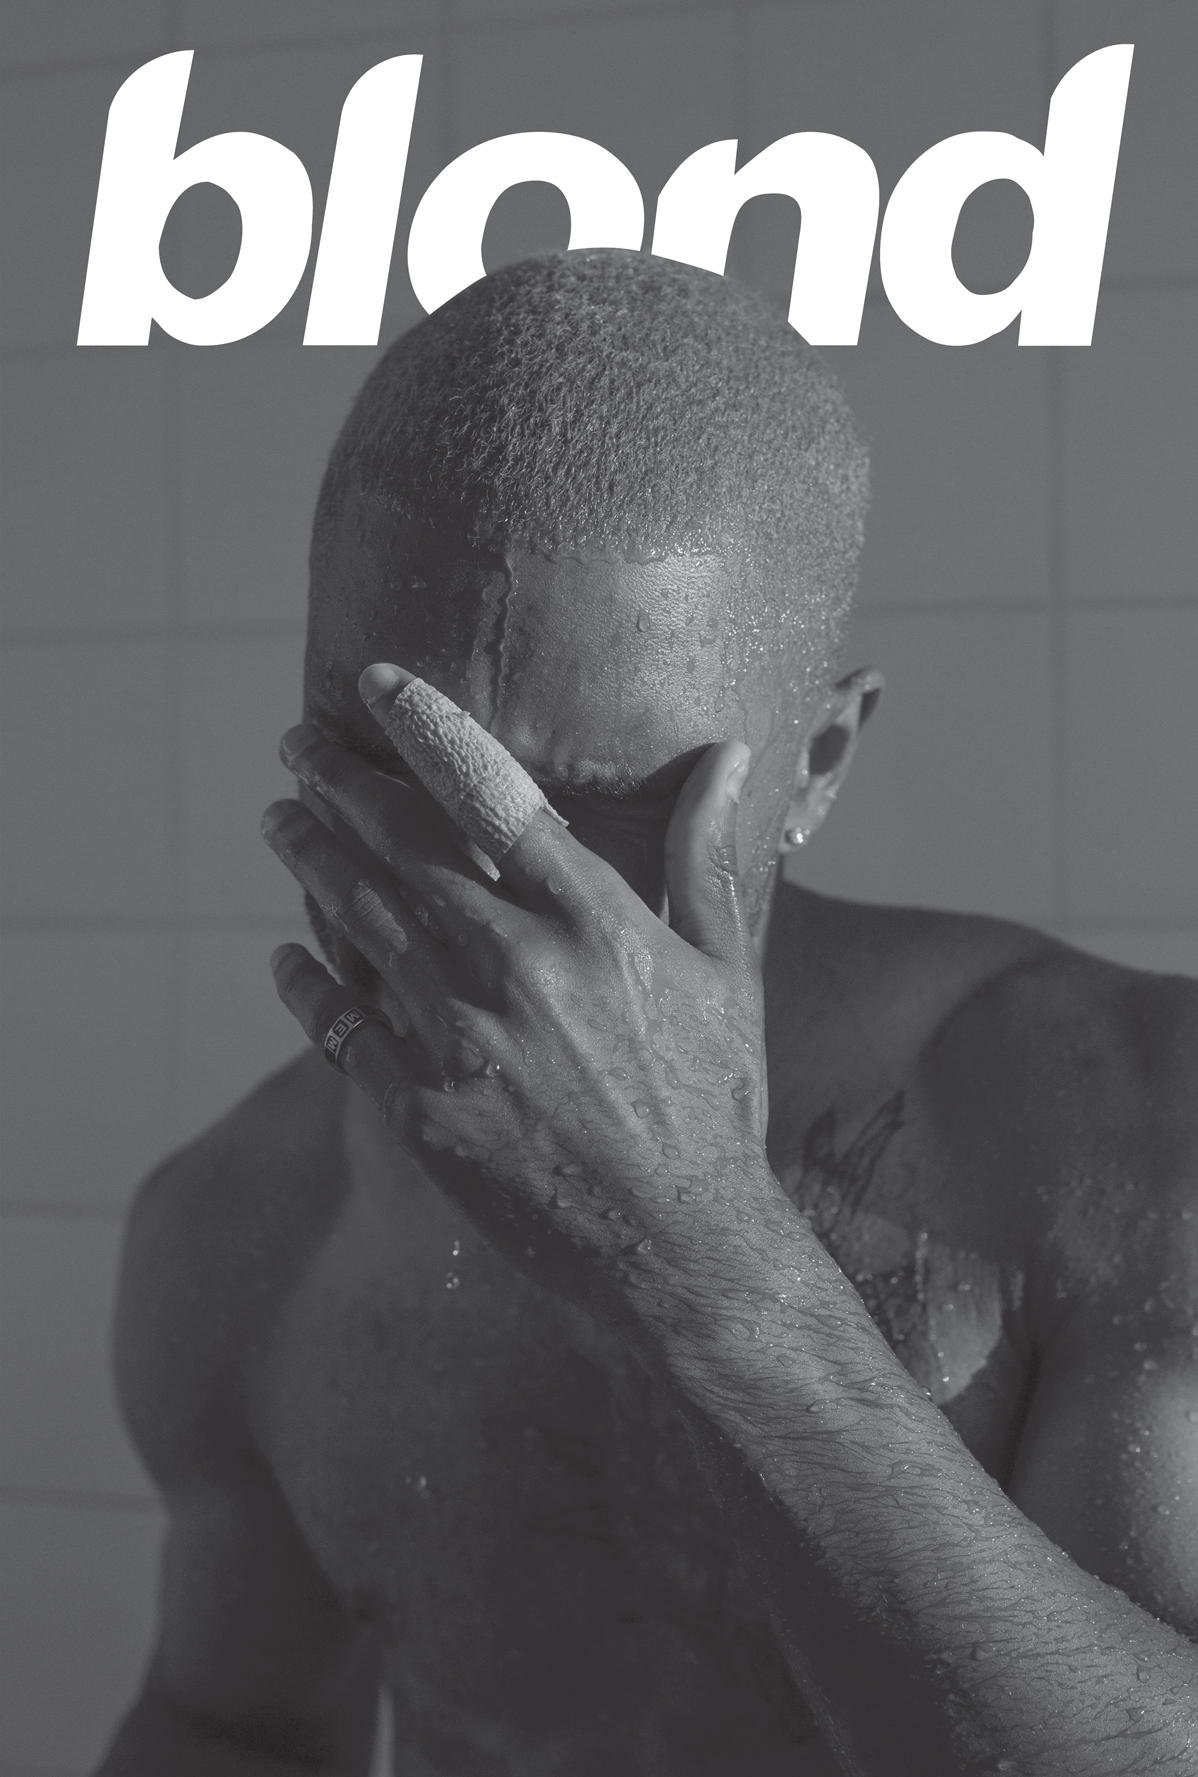 Frank Ocean, Blond Album Cover, Grayscale, Music Poster by Inkvo